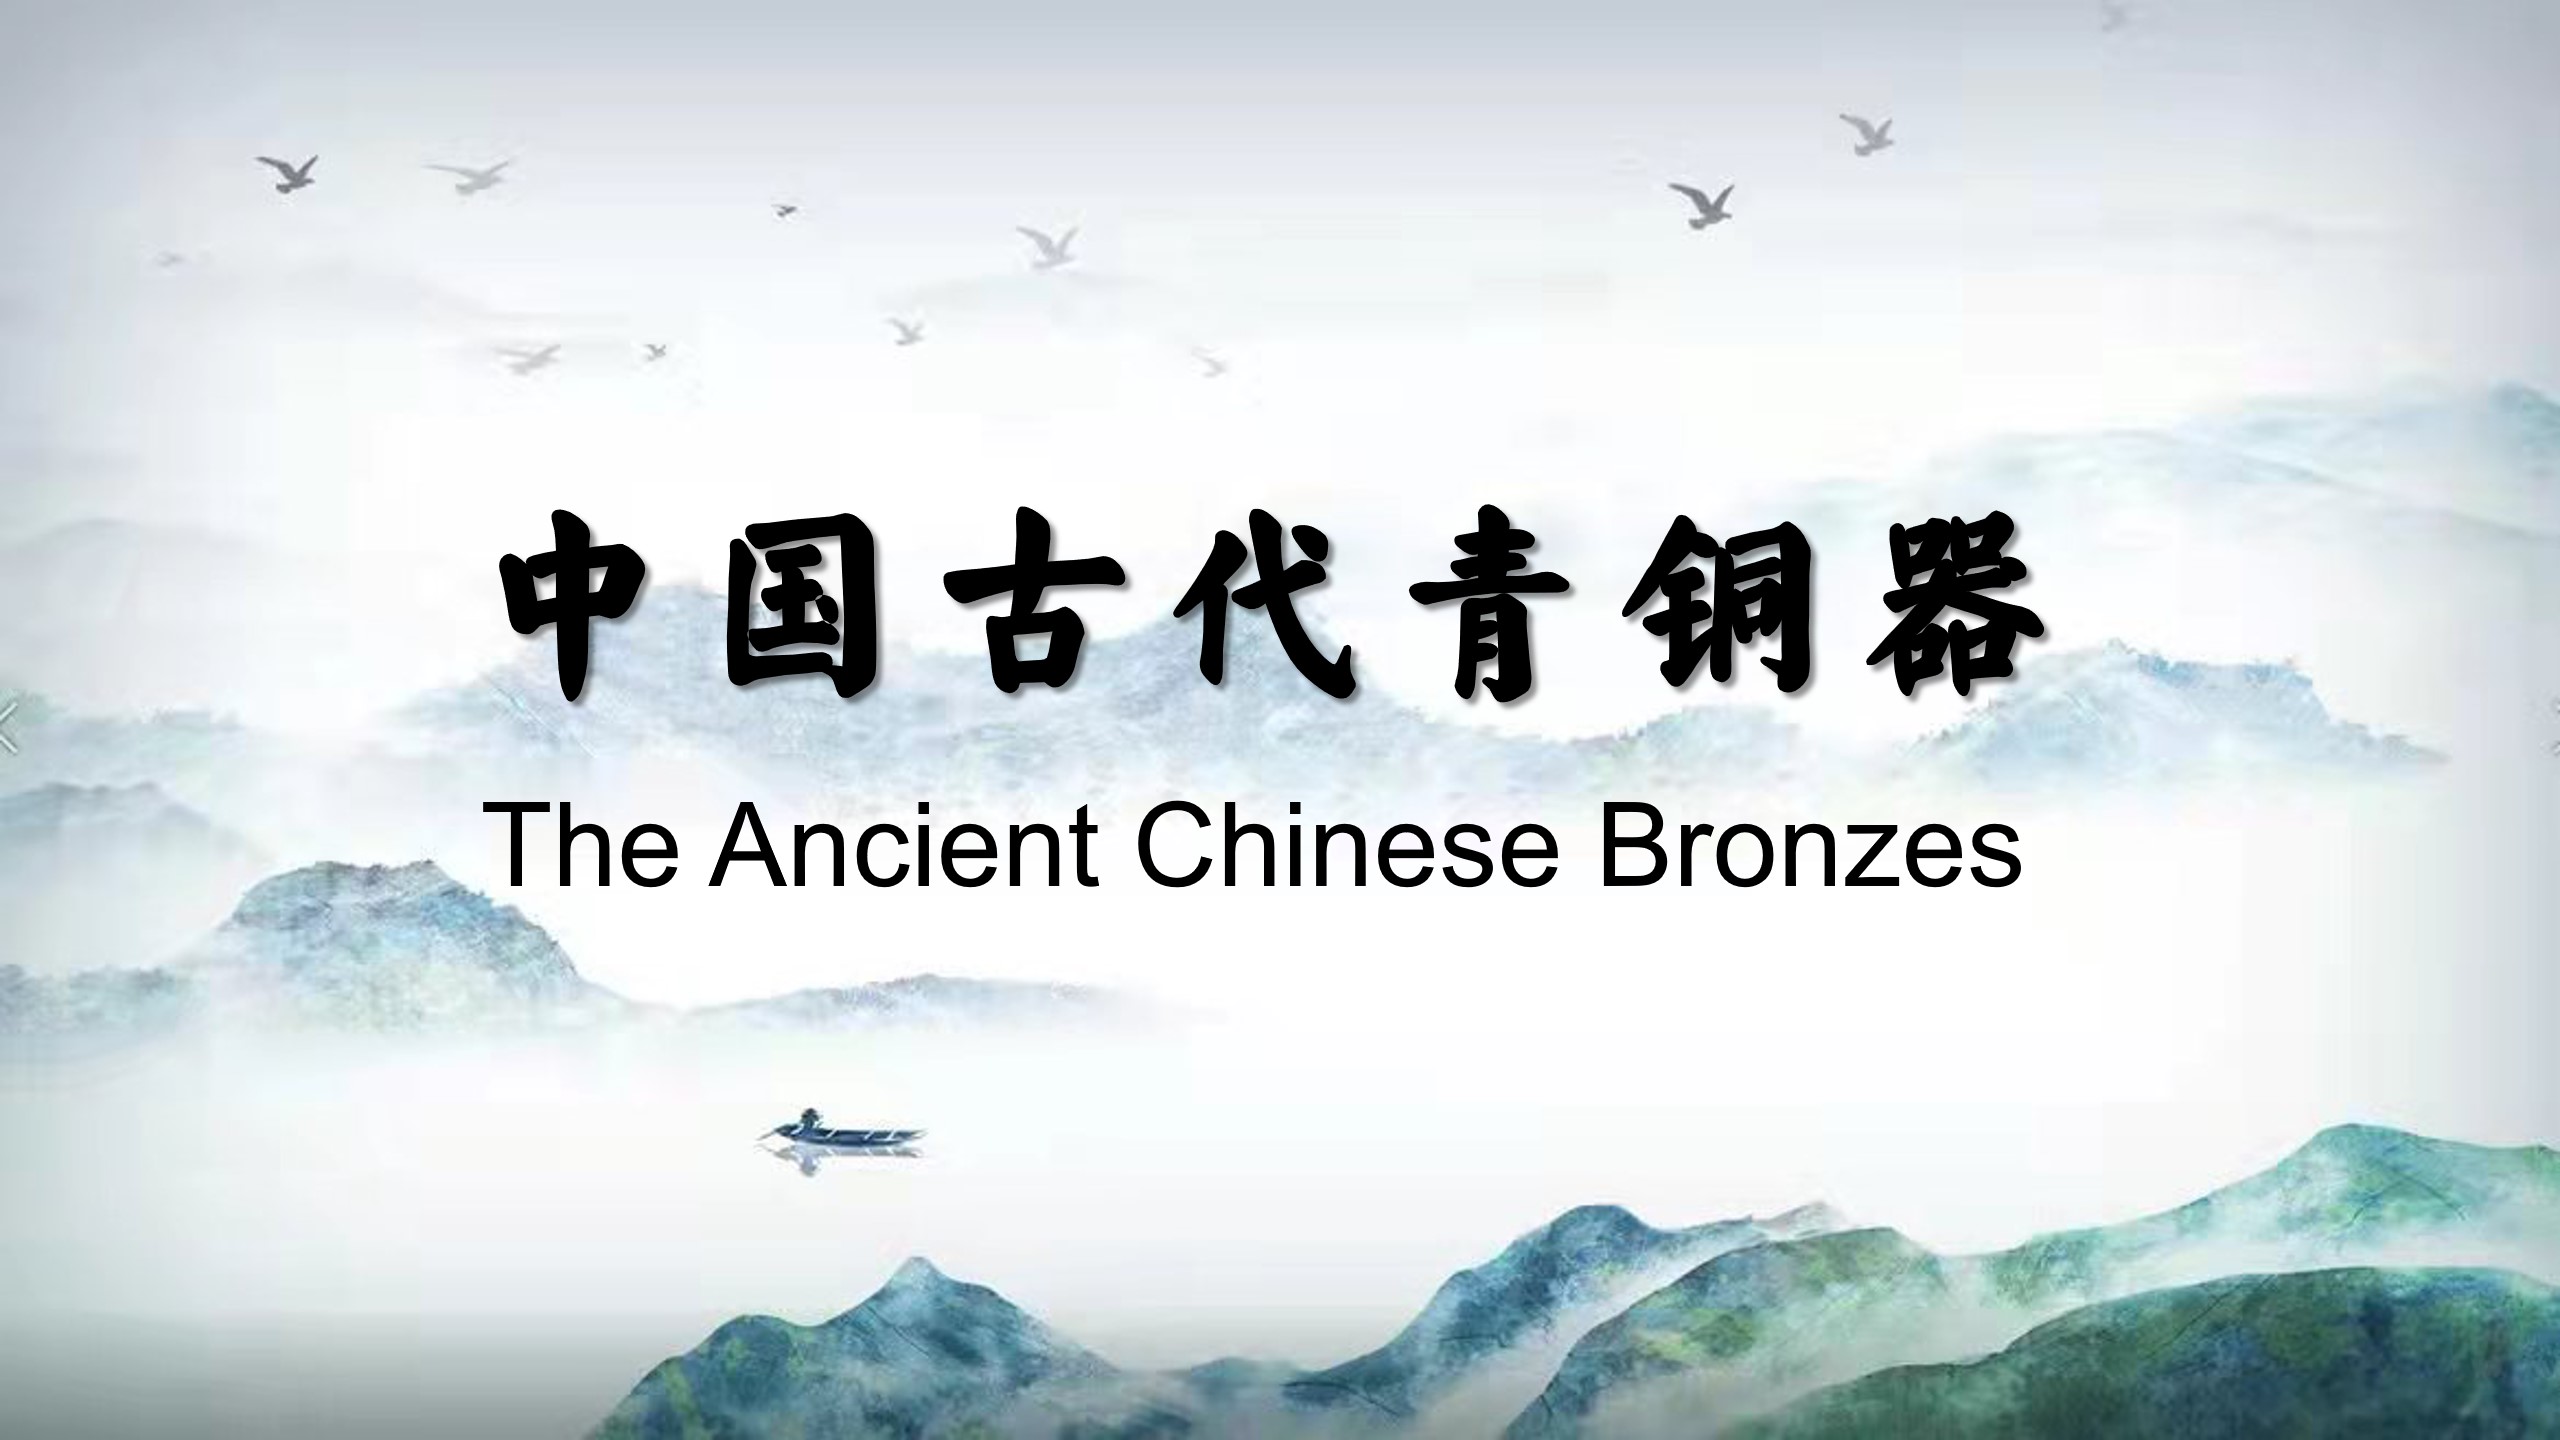 The Ancient Chinese Bronzes